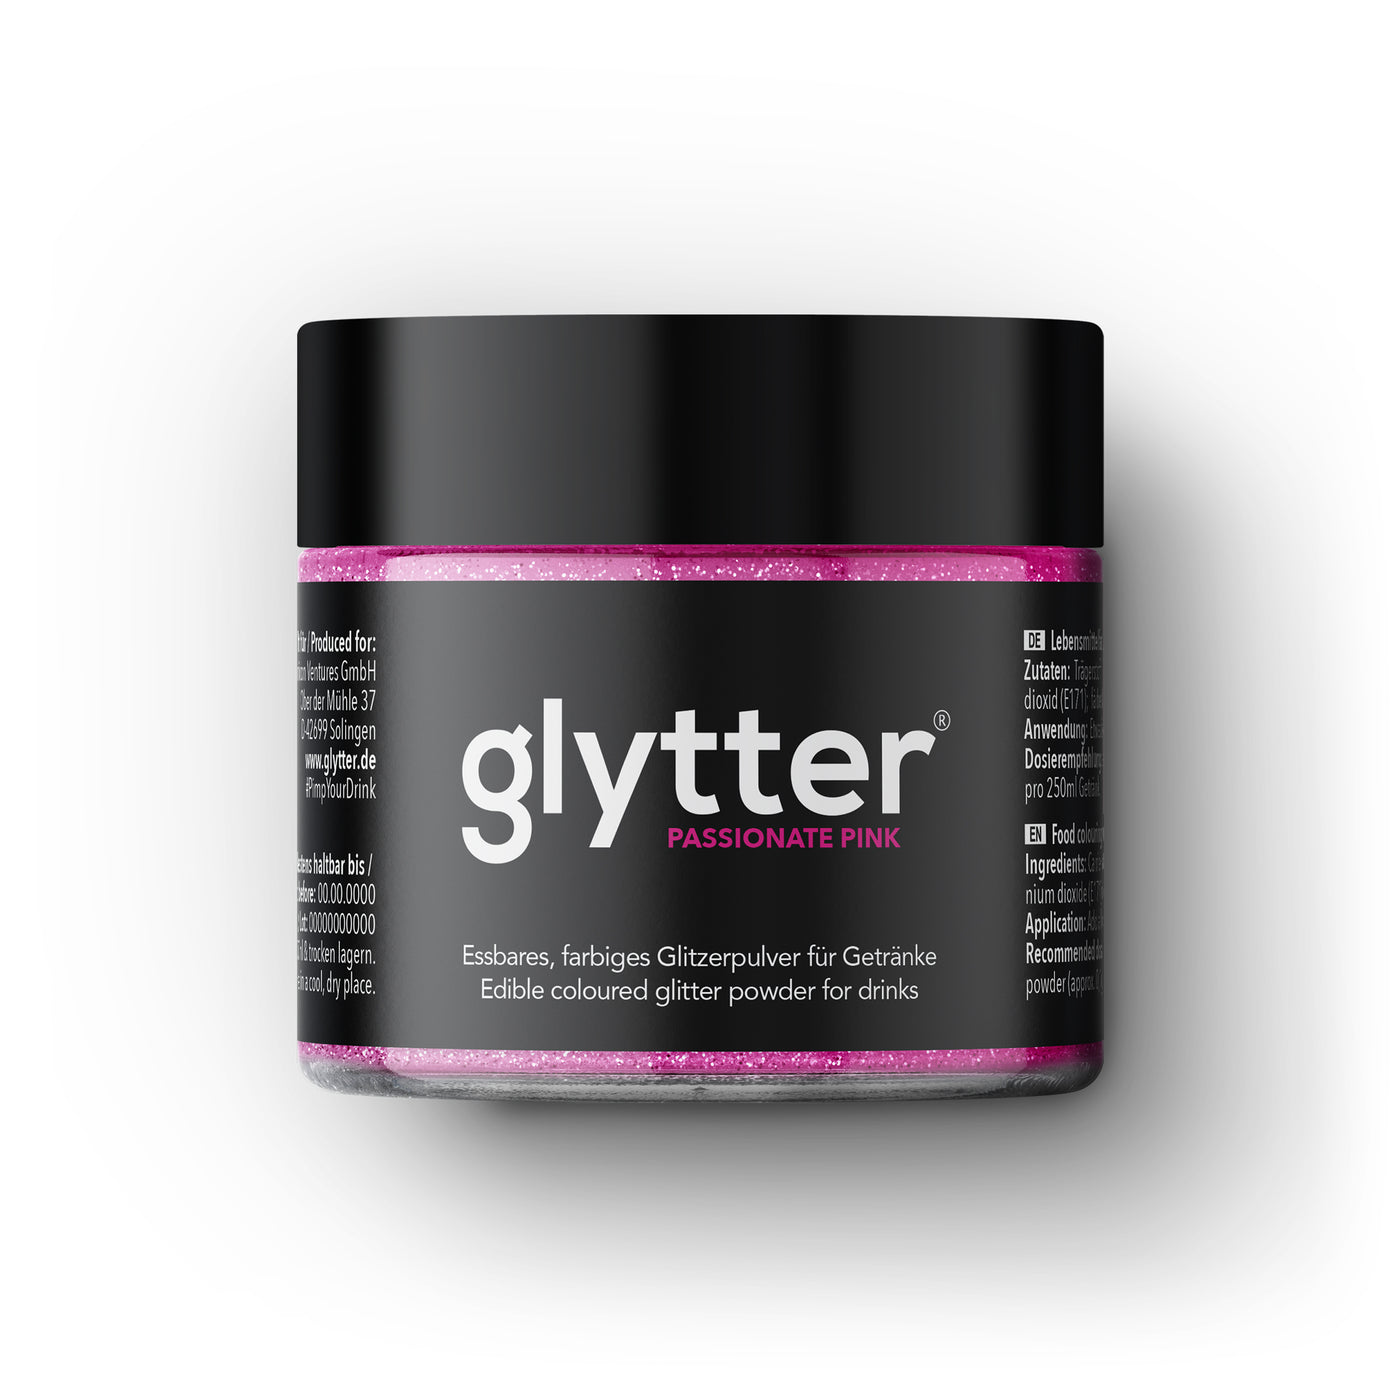 Glytter® - Passionate Pink